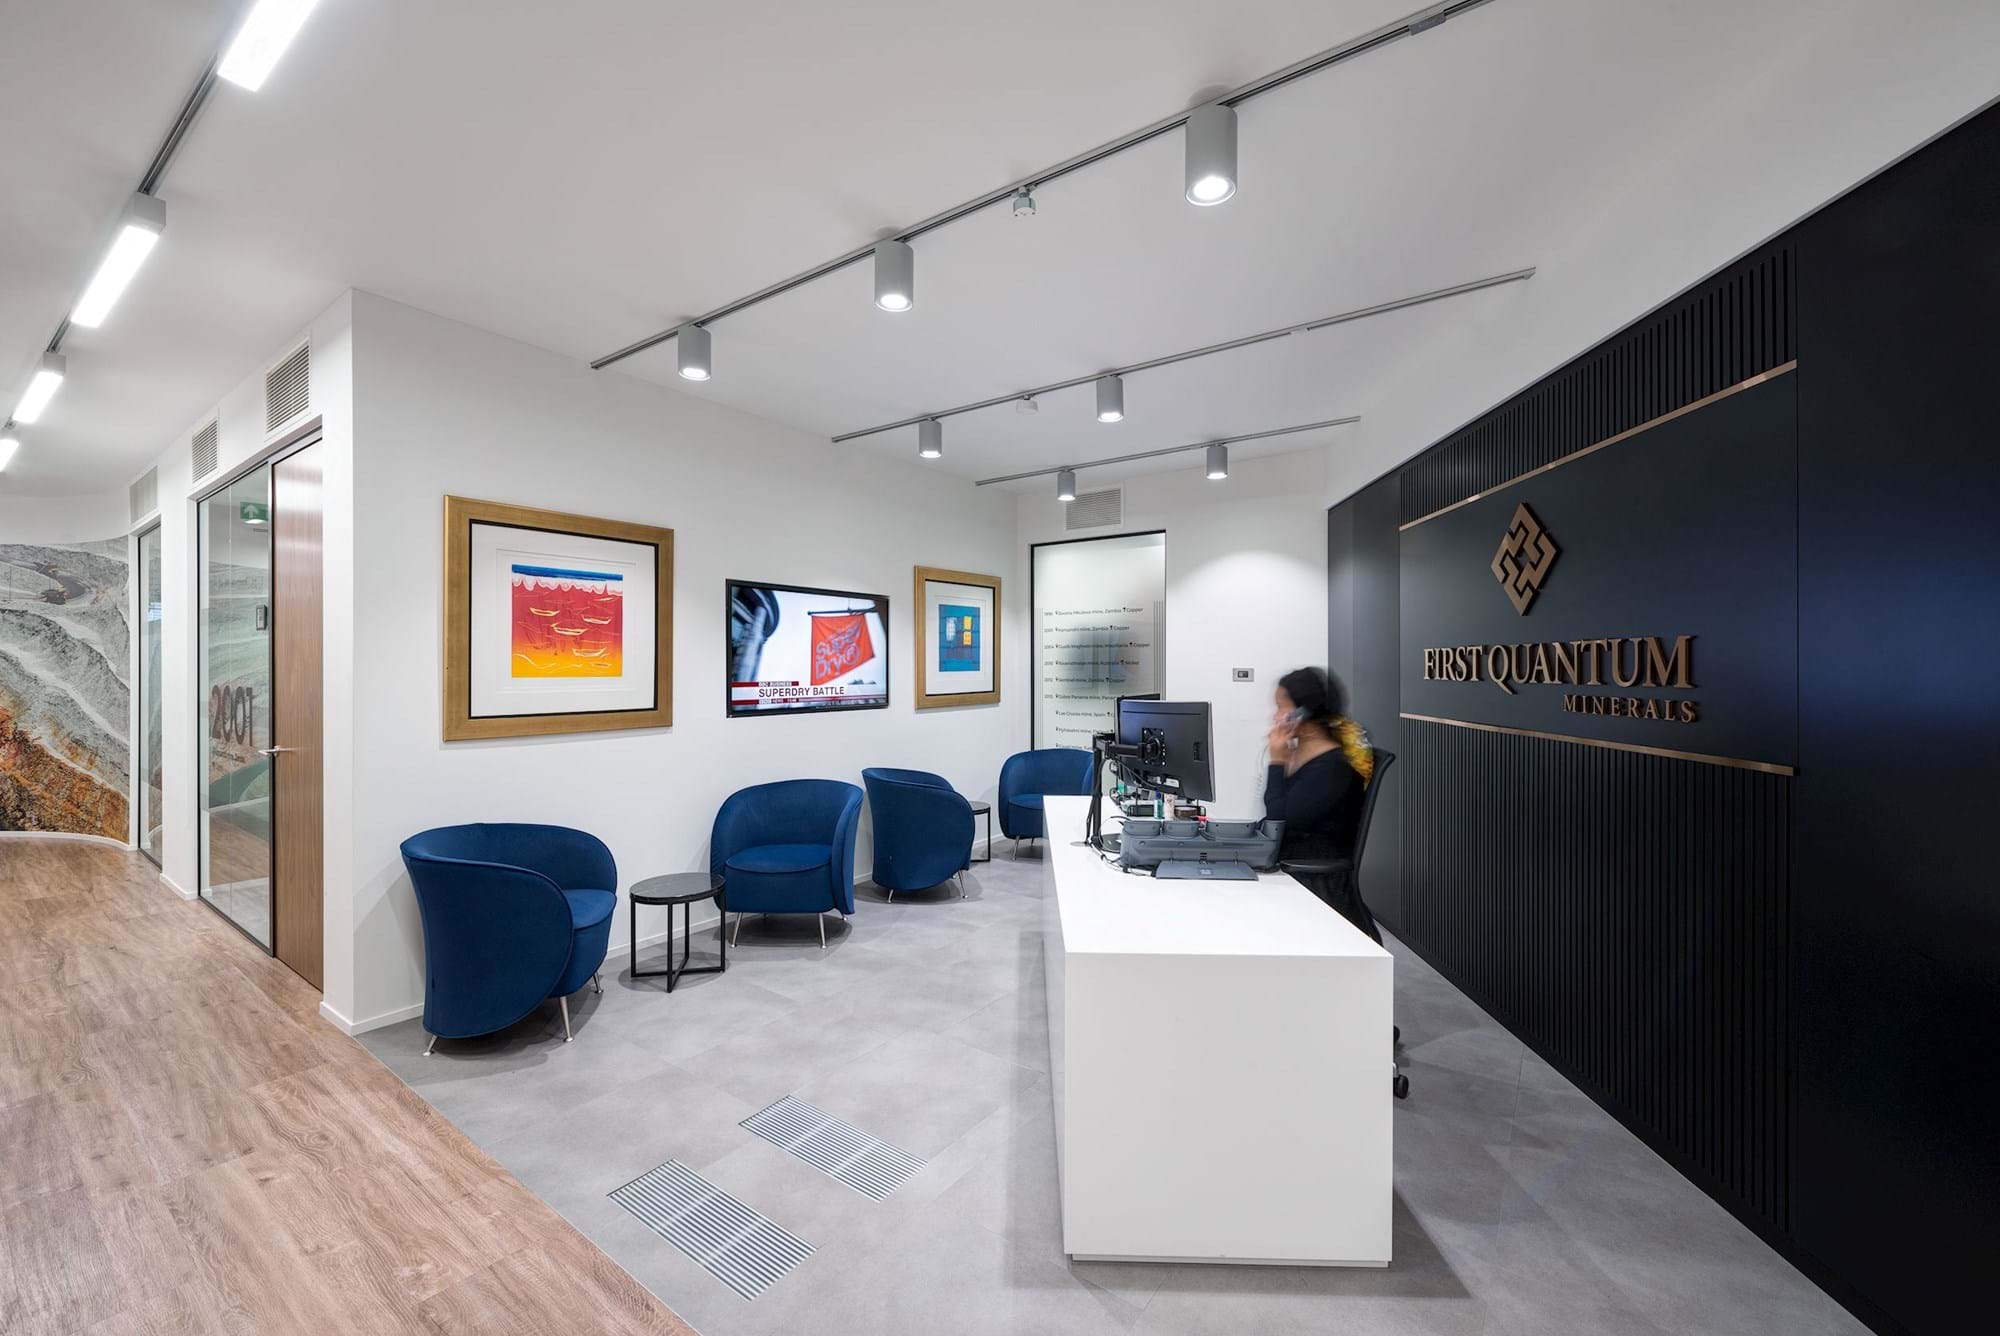 Modus Workspace office design, fit out and refurbishment - First Quantum Minerals - Reception - First Quantum Minerals - Reception